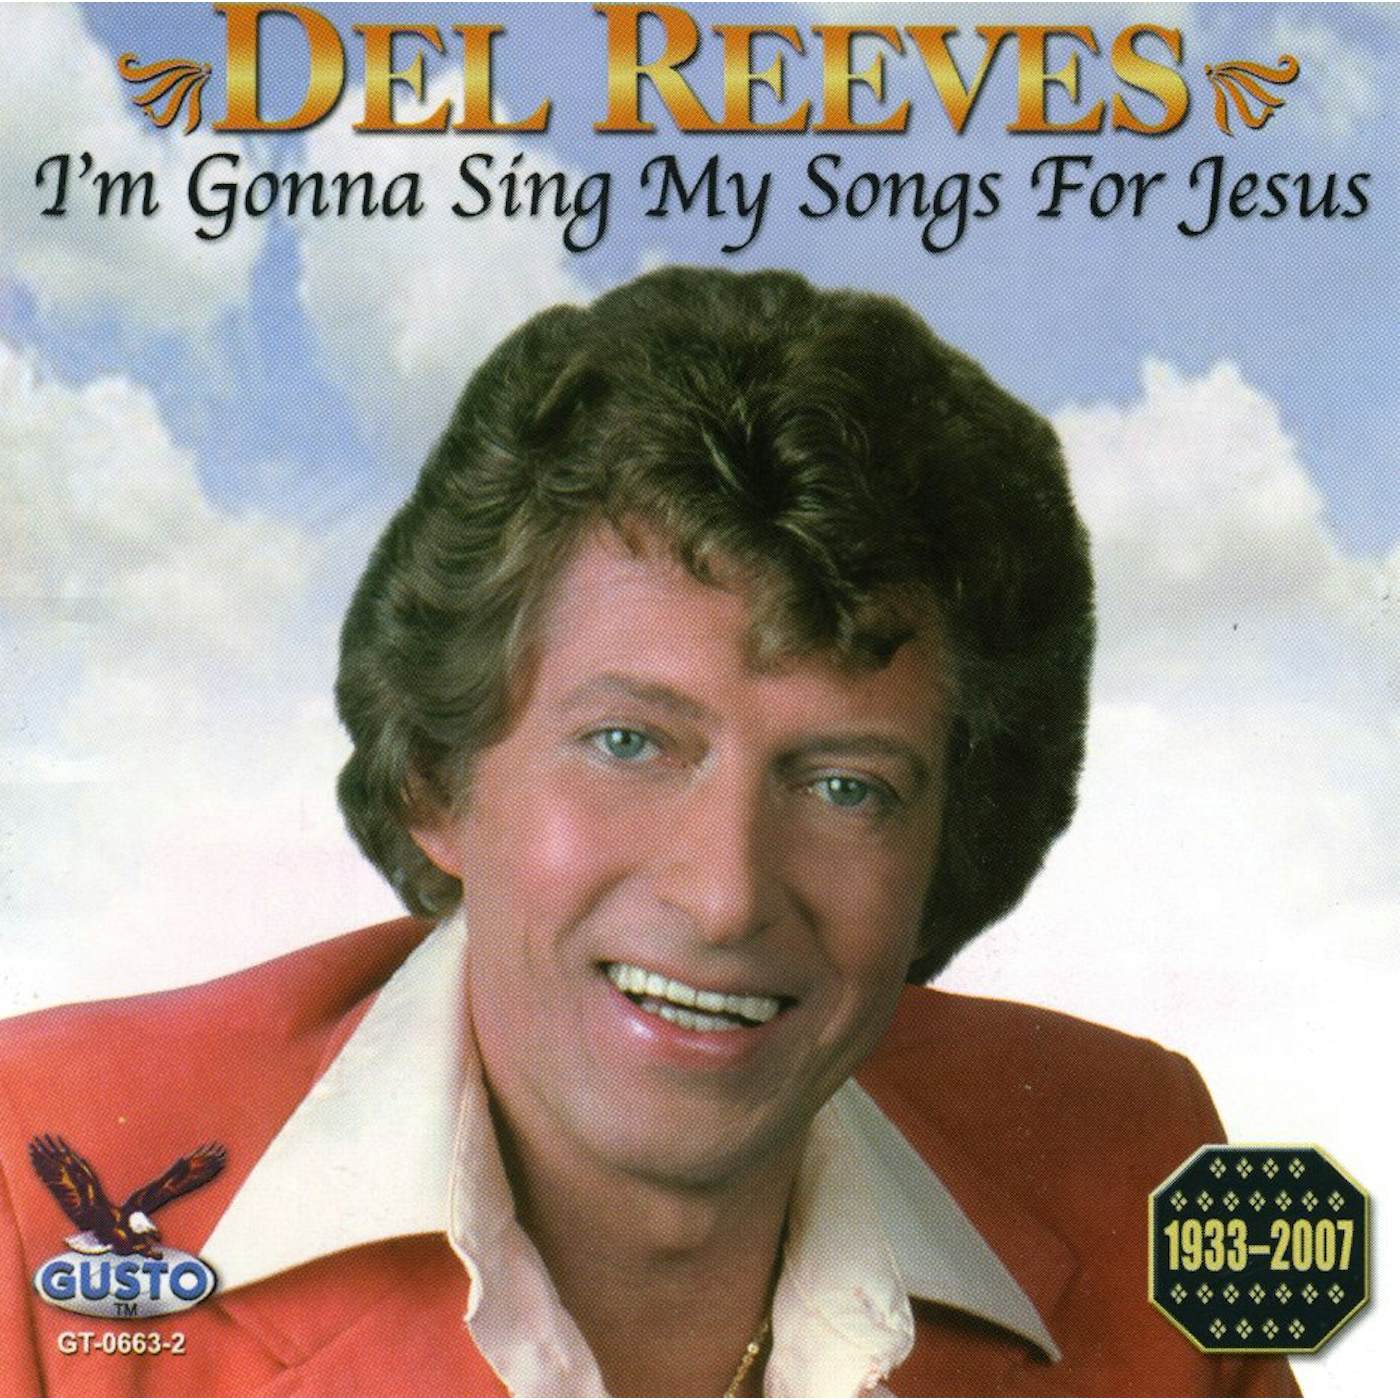 Del Reeves I'M GONNA SING MY SONGS FOR JESUS CD